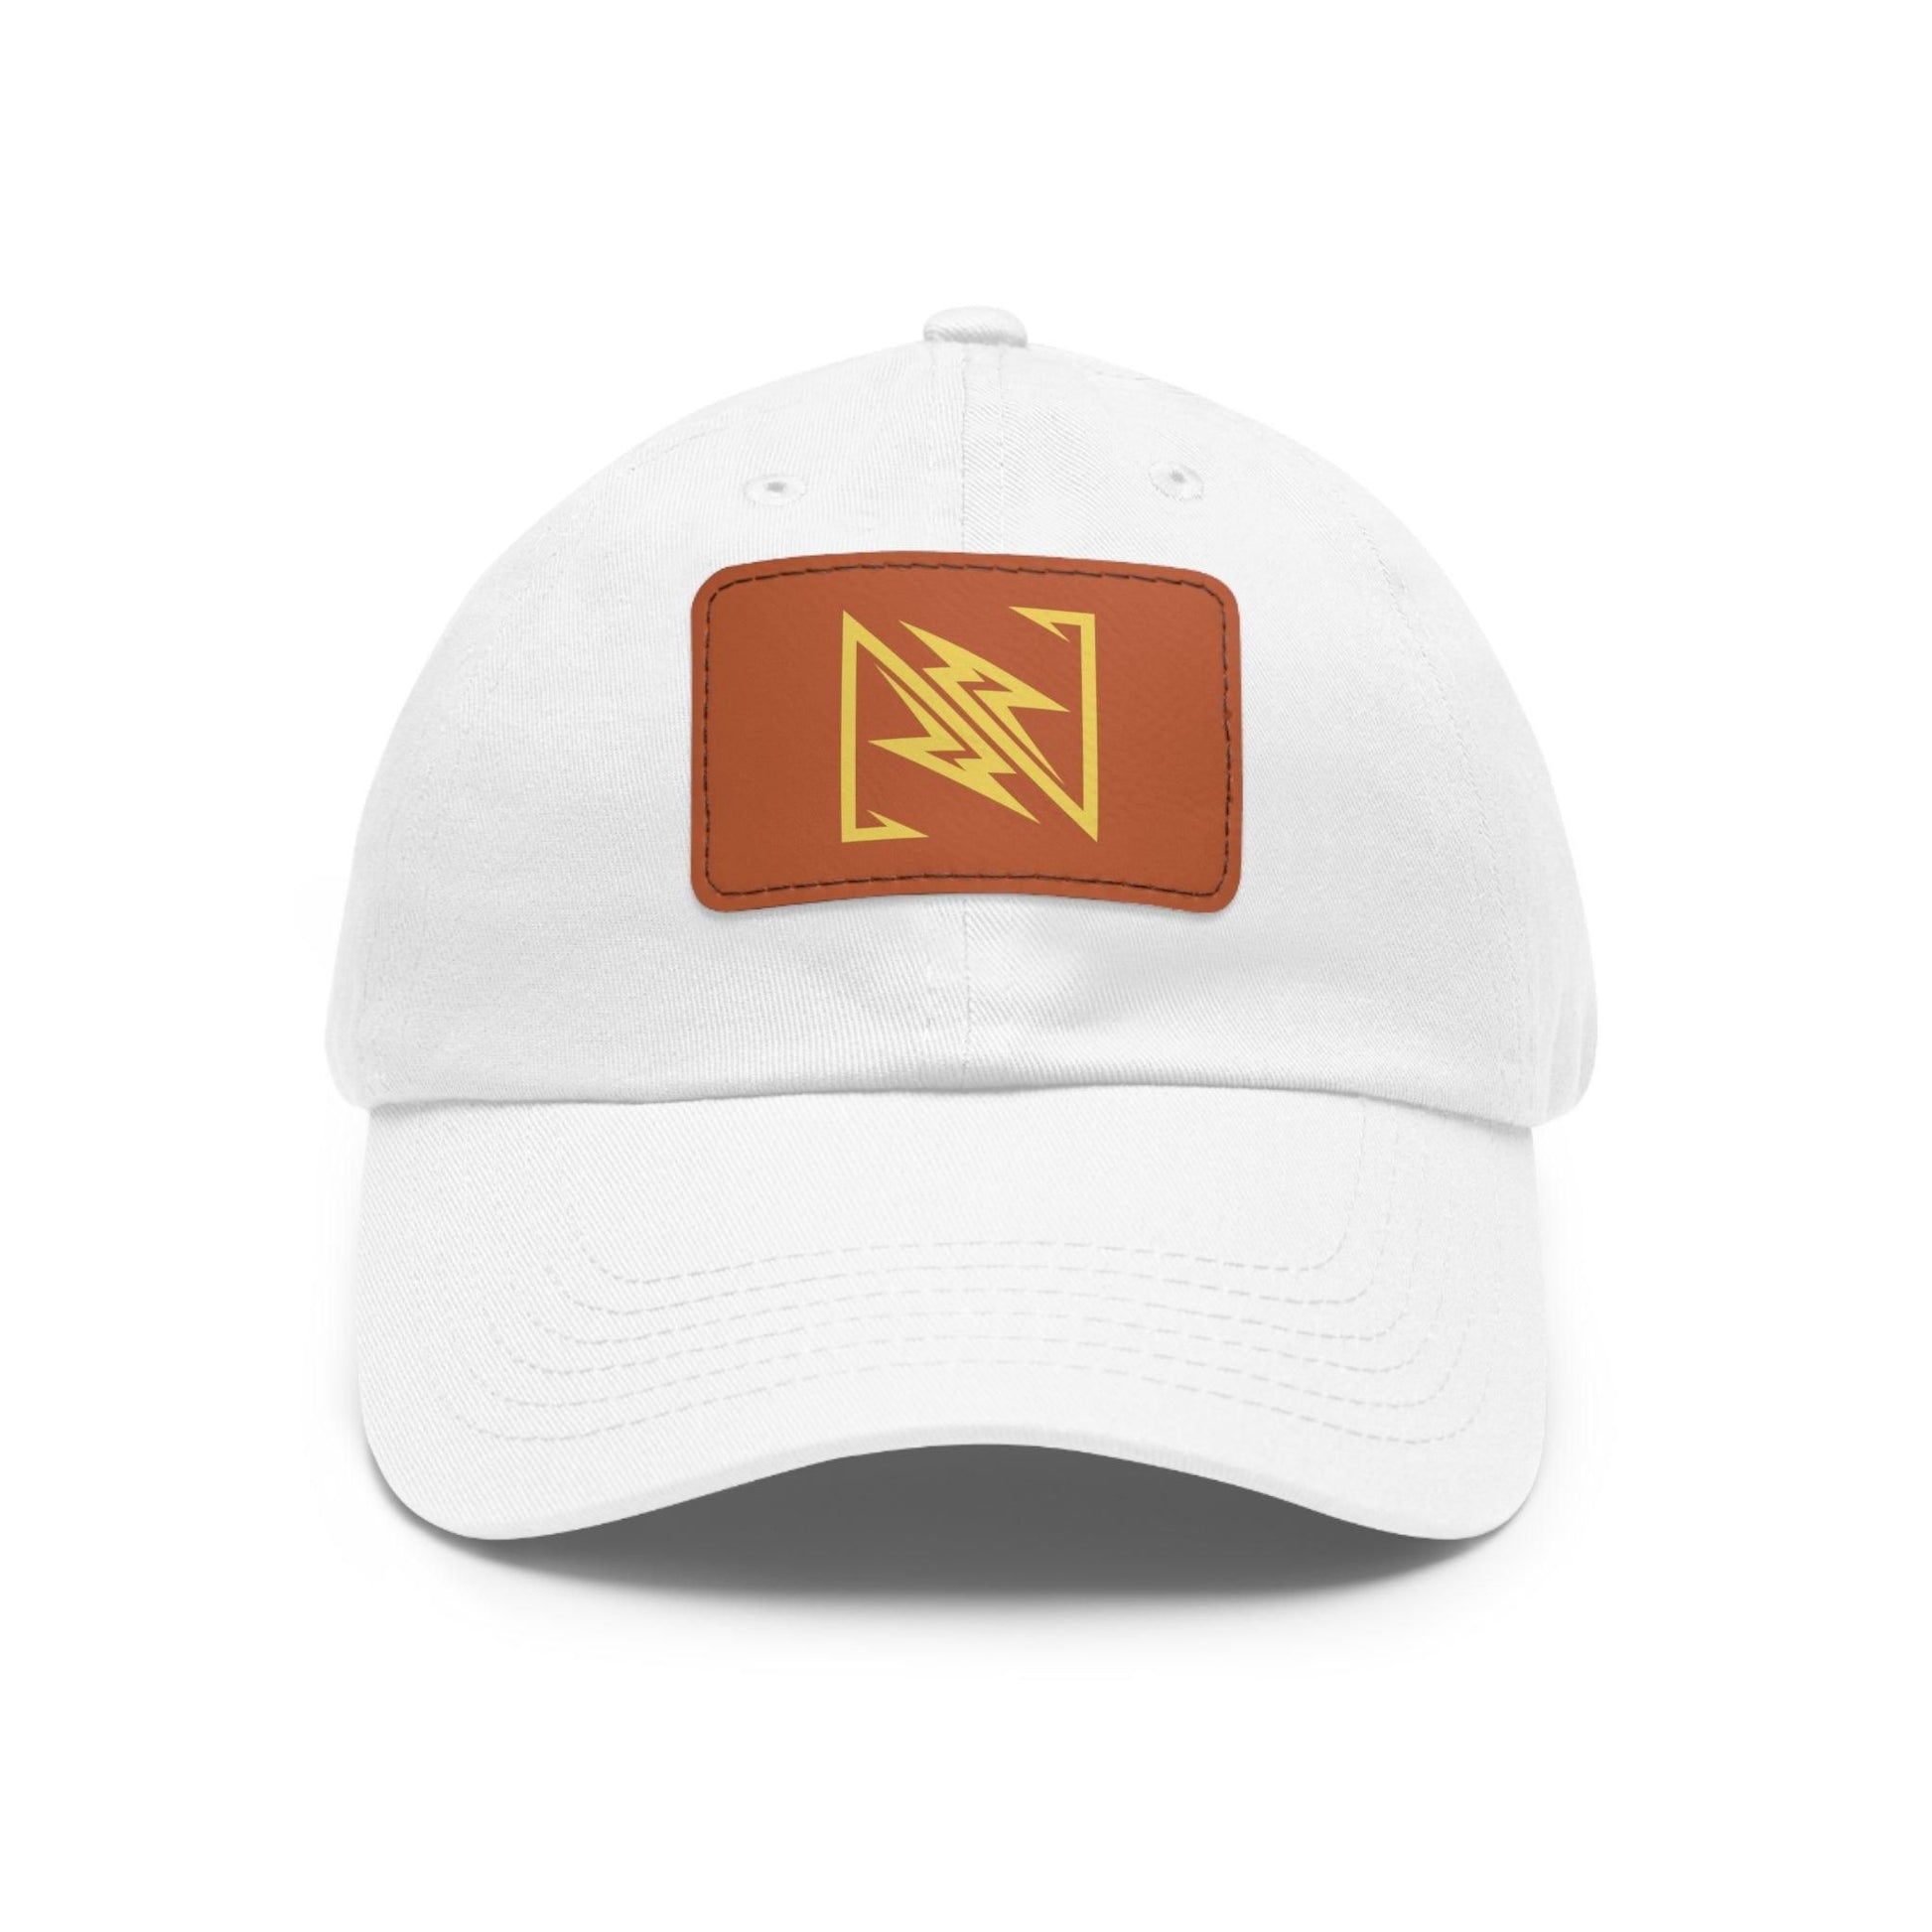 NX Vogue Premium Baseball Hat with Leather Patch Cap White / Light Brown patch Rectangle One size